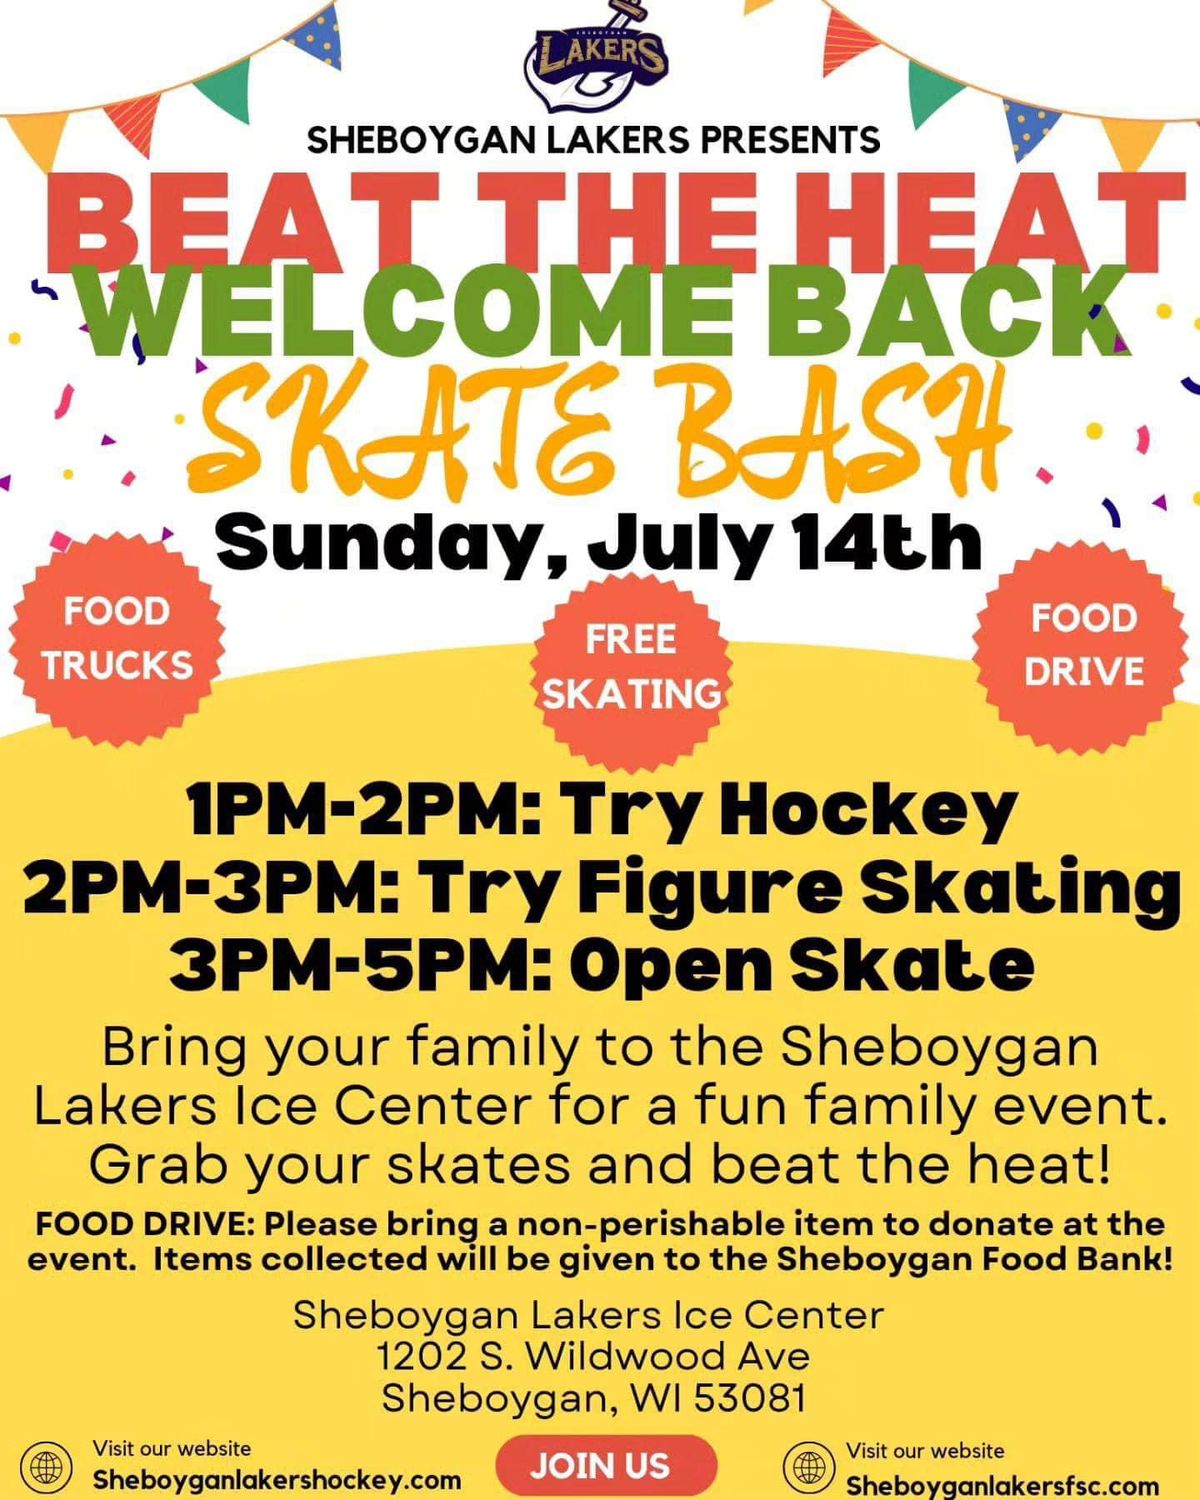 Beat the Heat - Welcome Back Skate Bash on Sunday, July 14th